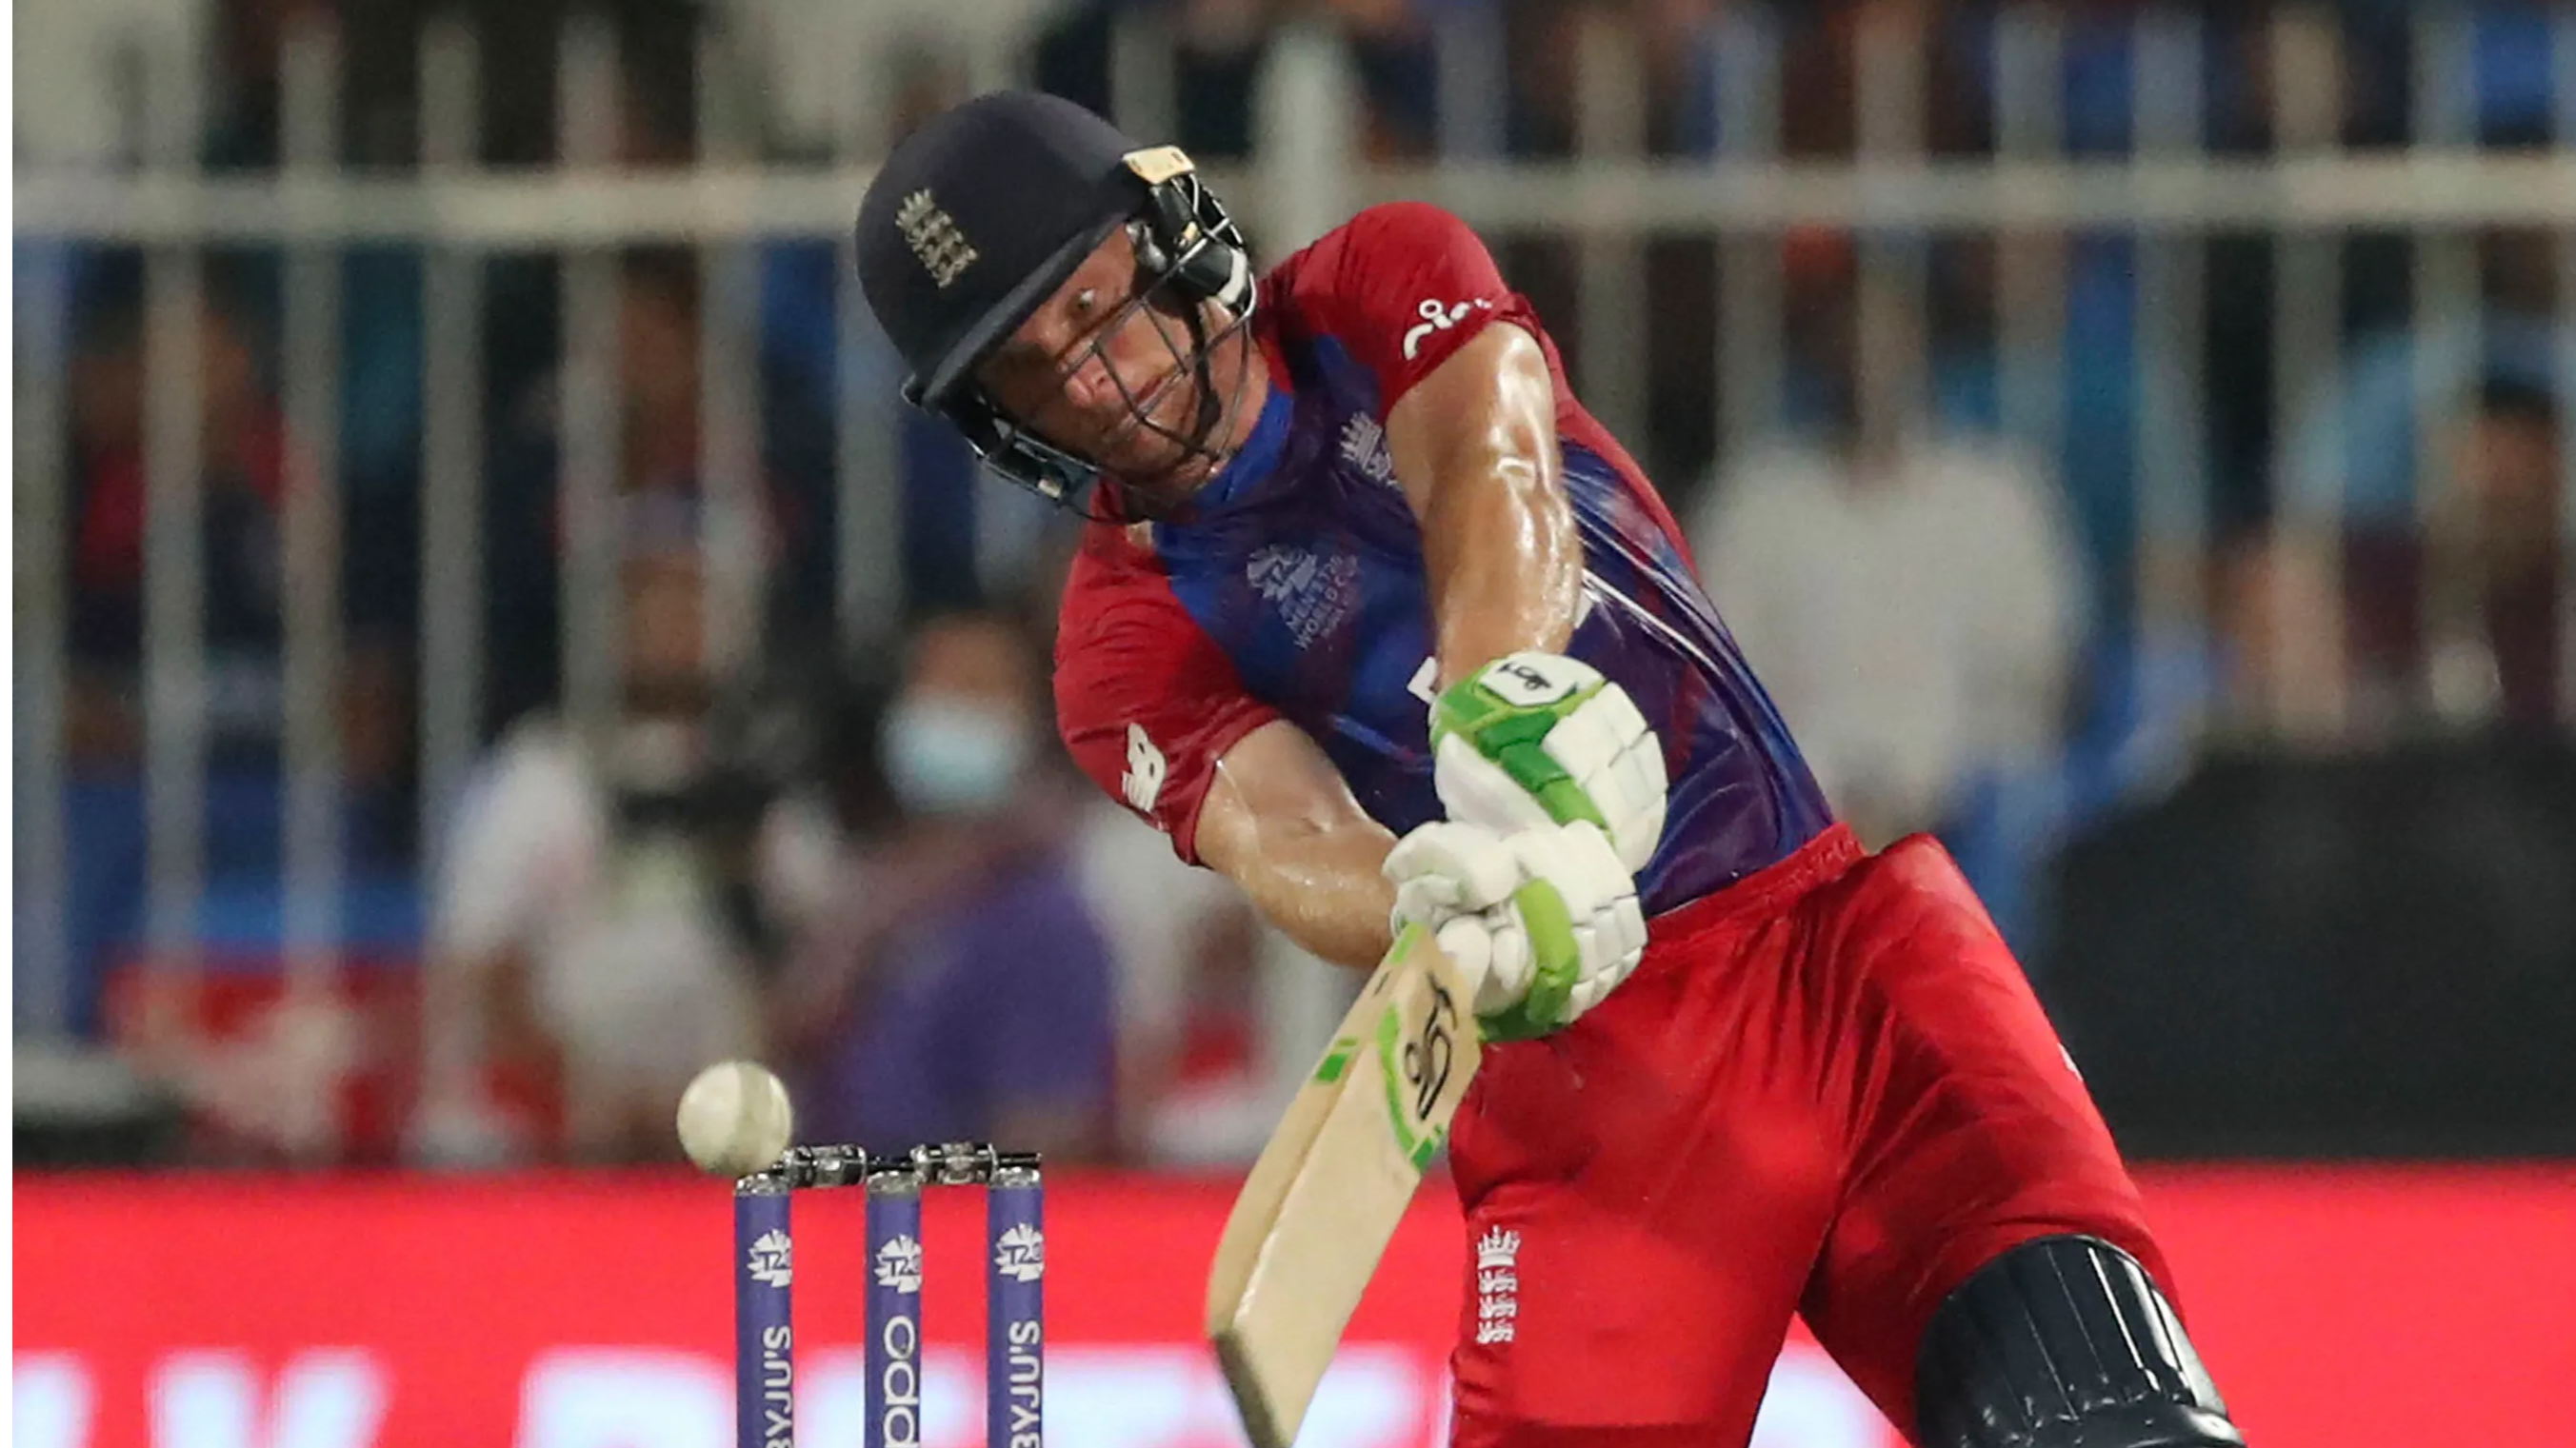 T20 World Cup, New Zealand vs England: When and where to watch live telecast, streaming?